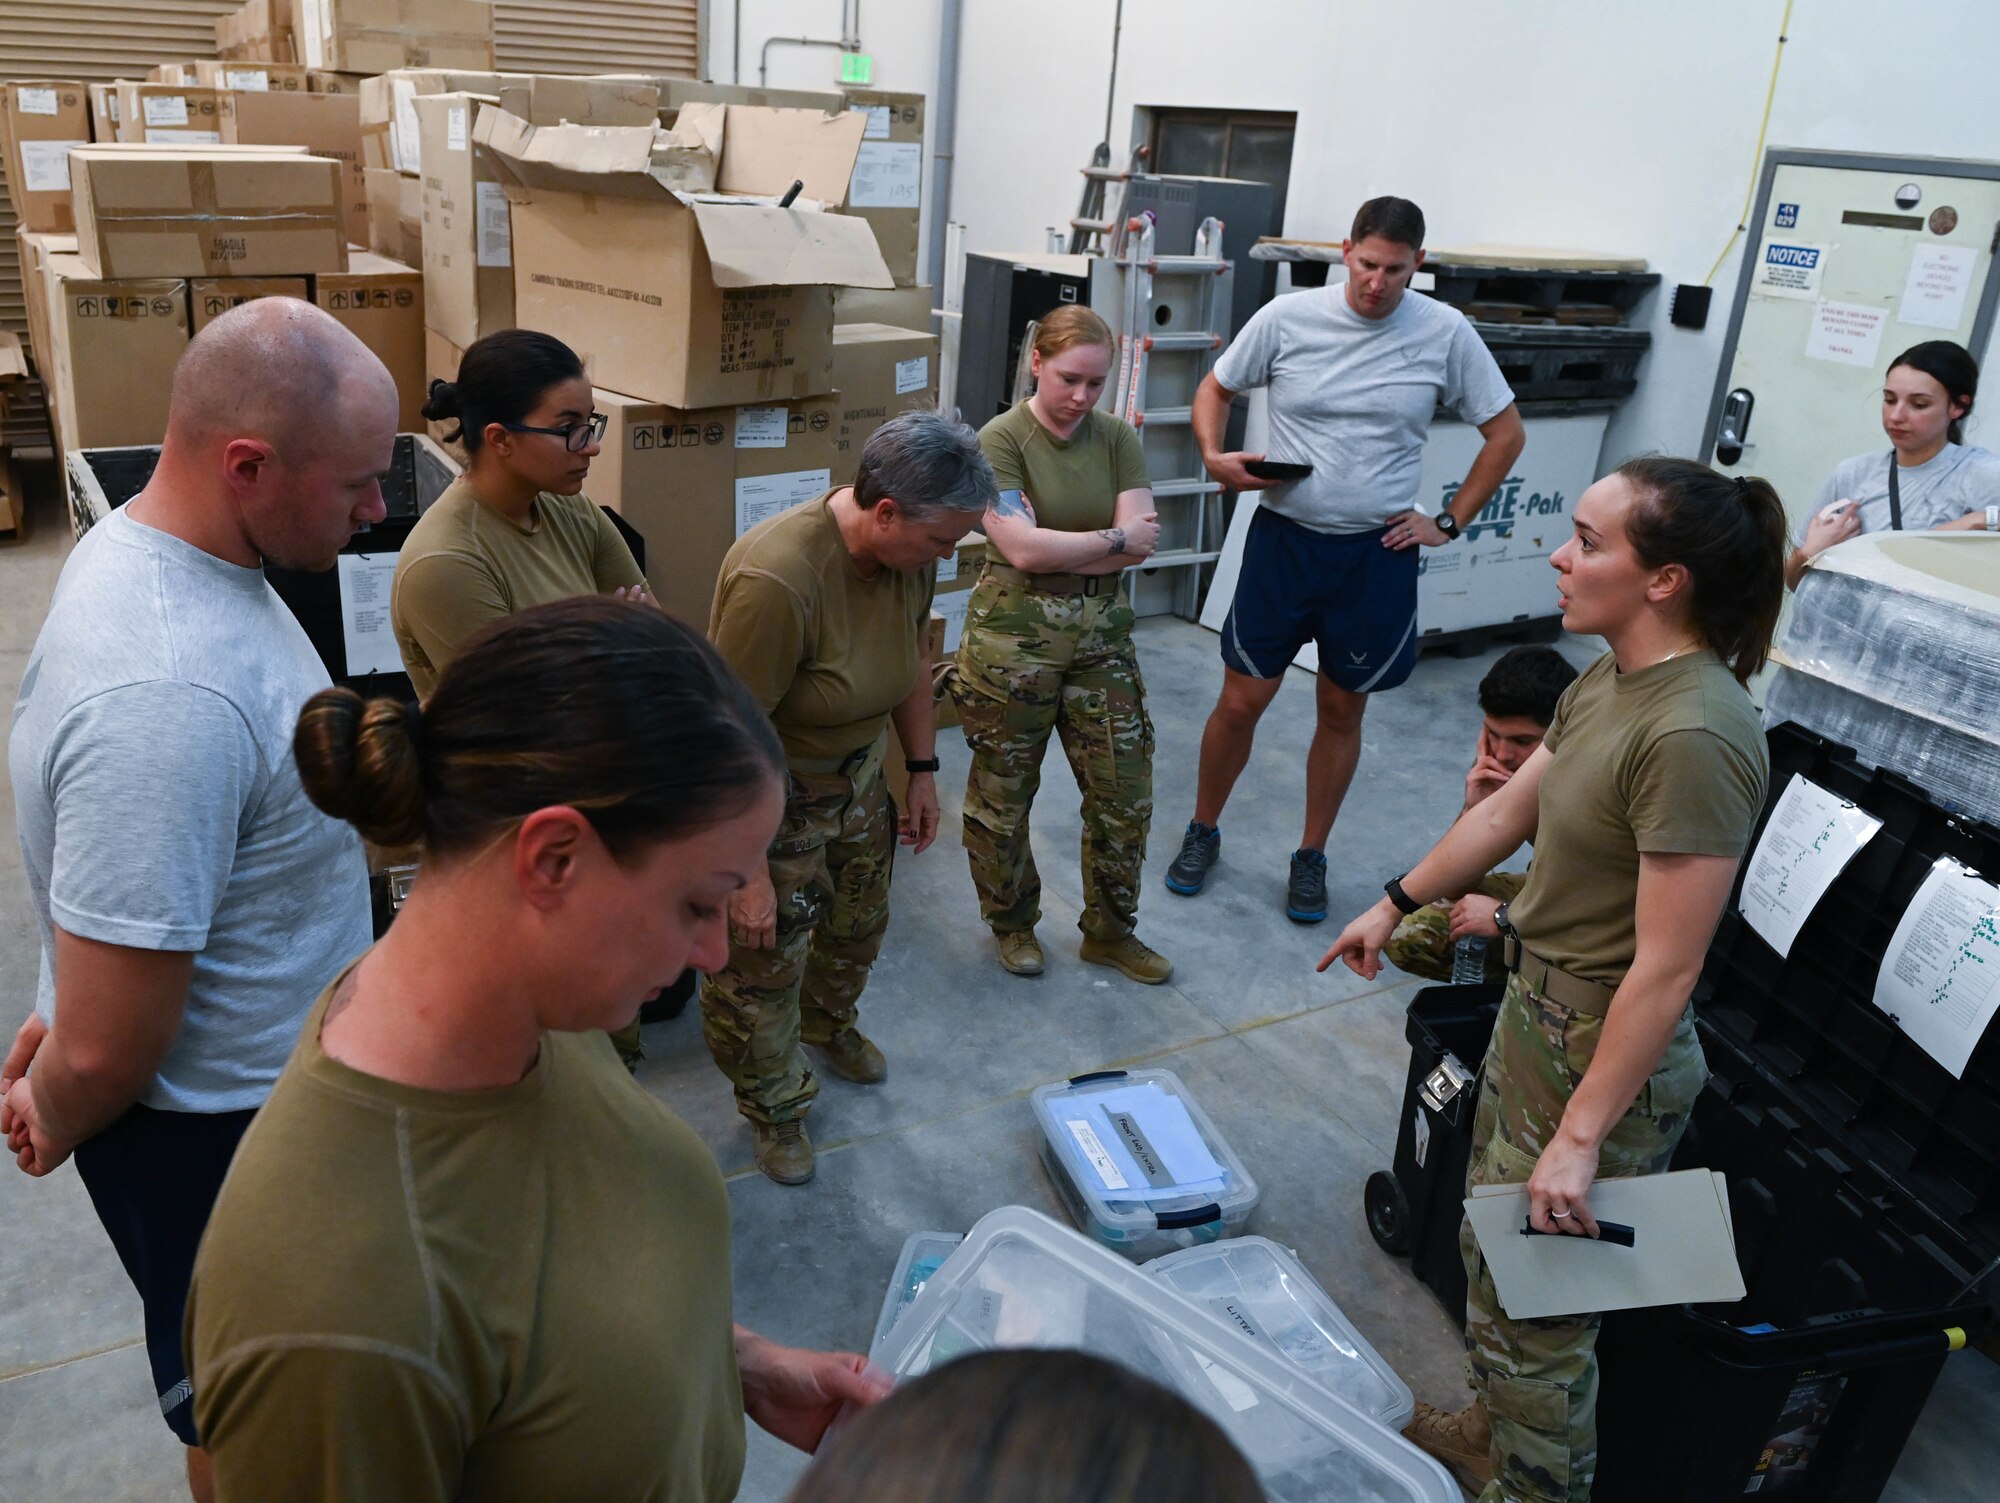 U.S. Air Force Staff Sgt. Mary Hicks (right), a 379th Expeditionary Air Evacuation Squadron biological environmental technician, briefs other members of the 379th EAES during an exercise July 11, 2022 at Al Udeid Airbase, Qatar. The medical evacuation staff drilled in the practice of utilizing a negative pressurized container for transporting highly contagious patients to medical facilities. (U.S. Air National Guard photo by Tech. Sgt. Michael J. Kelly)